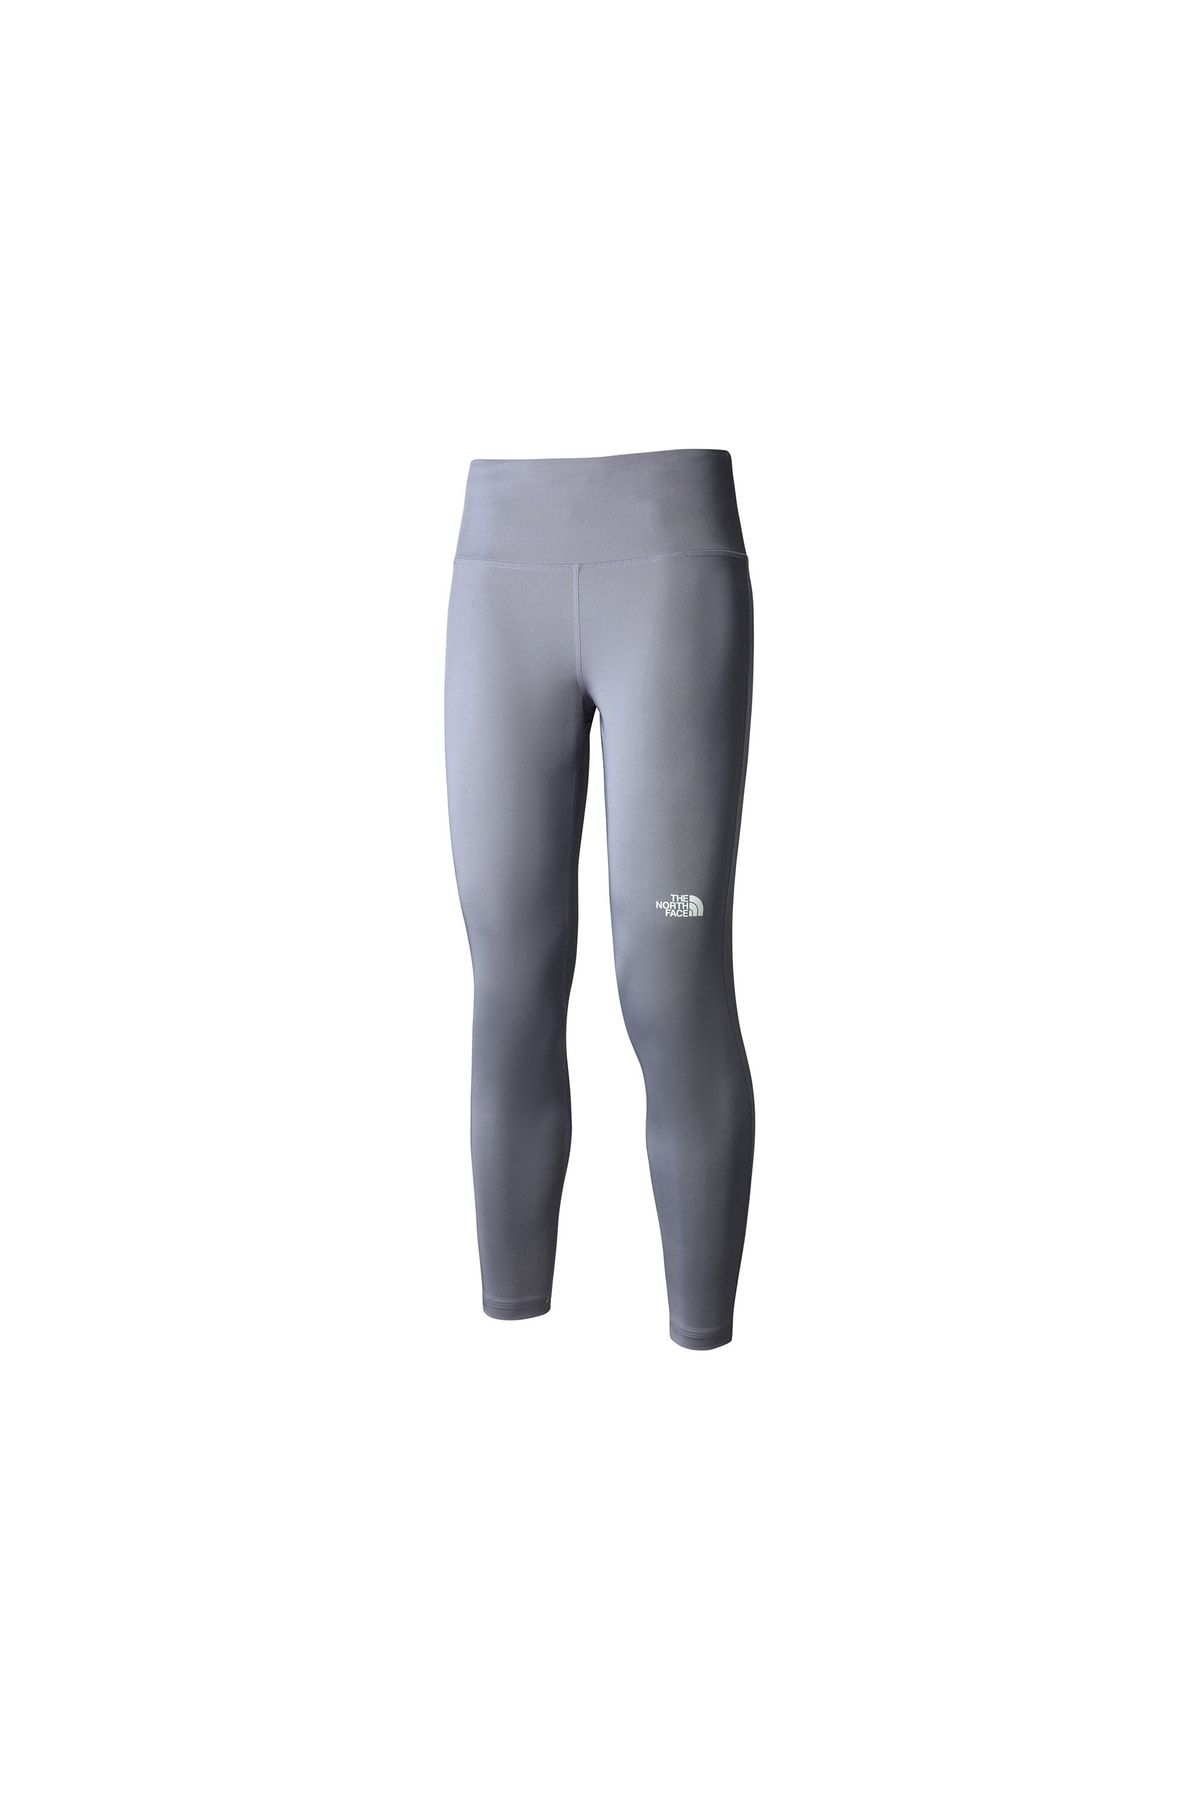 The North Face W Flex High Rise 7/8 Tight Women's High Waisted Running  Tights Nf0a7zb8n141 Gray - Trendyol